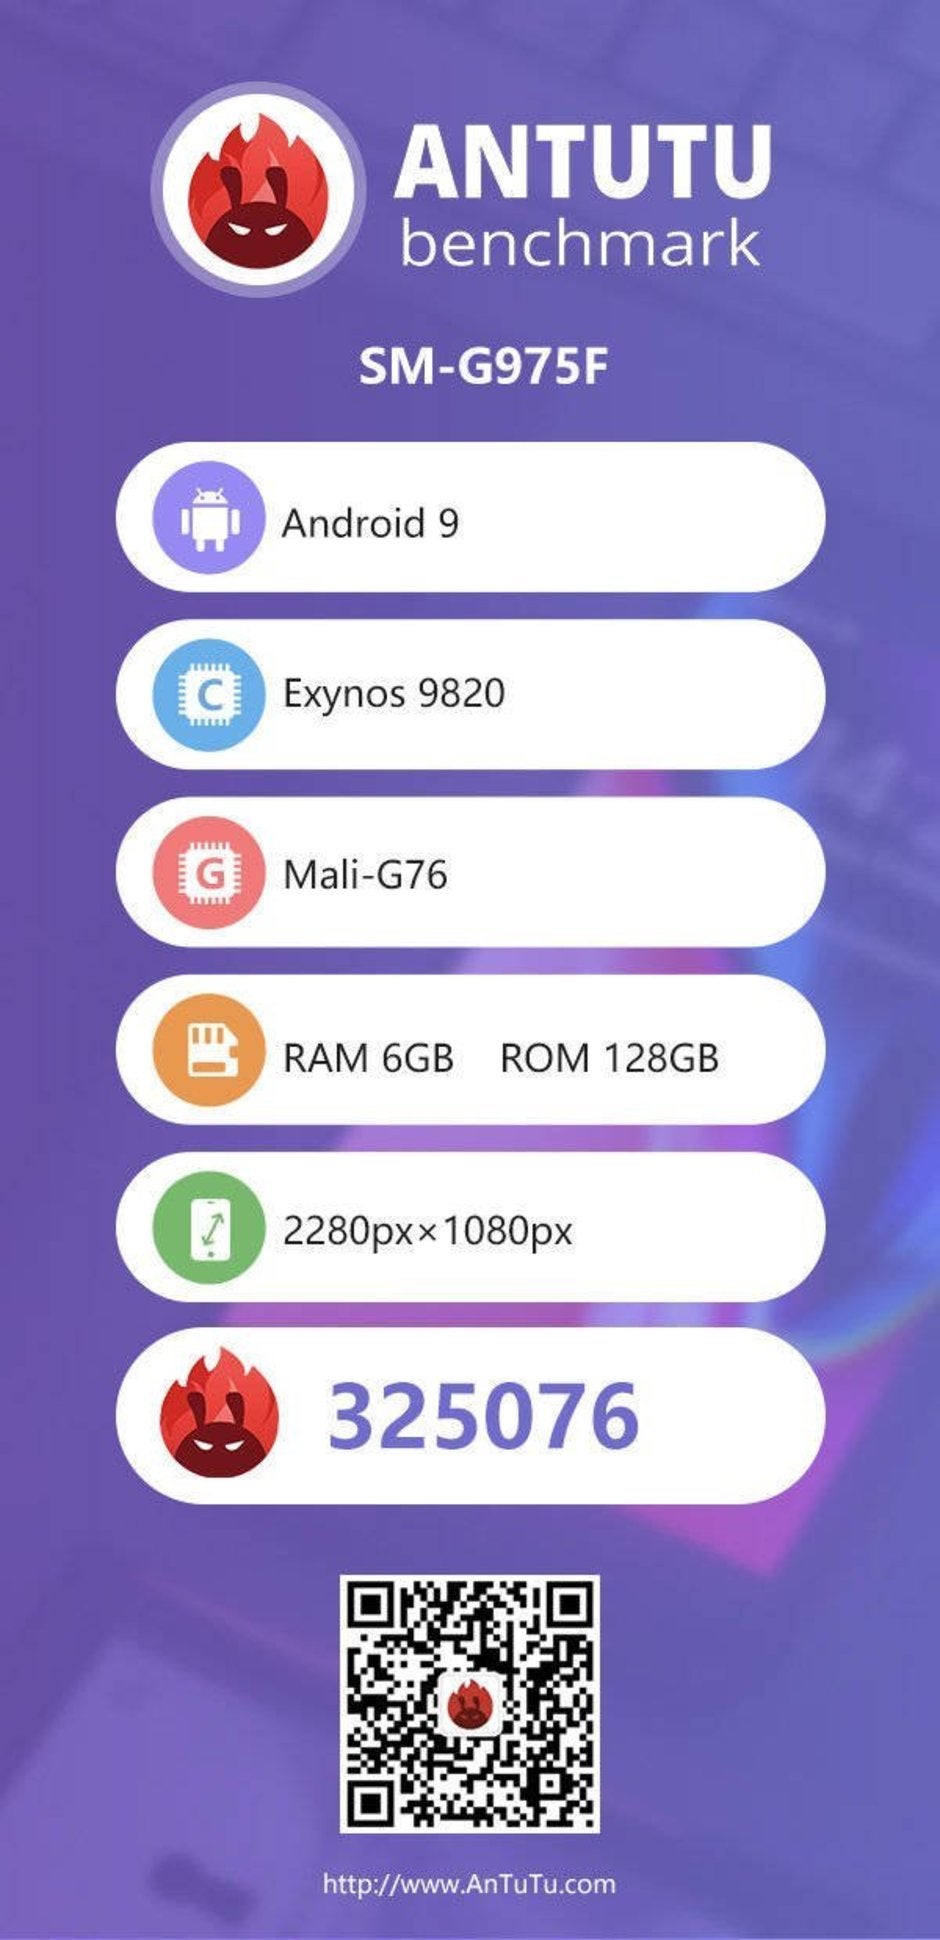 Galaxy S10+'s alleged AnTuTu benchmark listing - Exynos-powered Samsung Galaxy S10+ pops up on AnTuTu, scores an excellent benchmark result